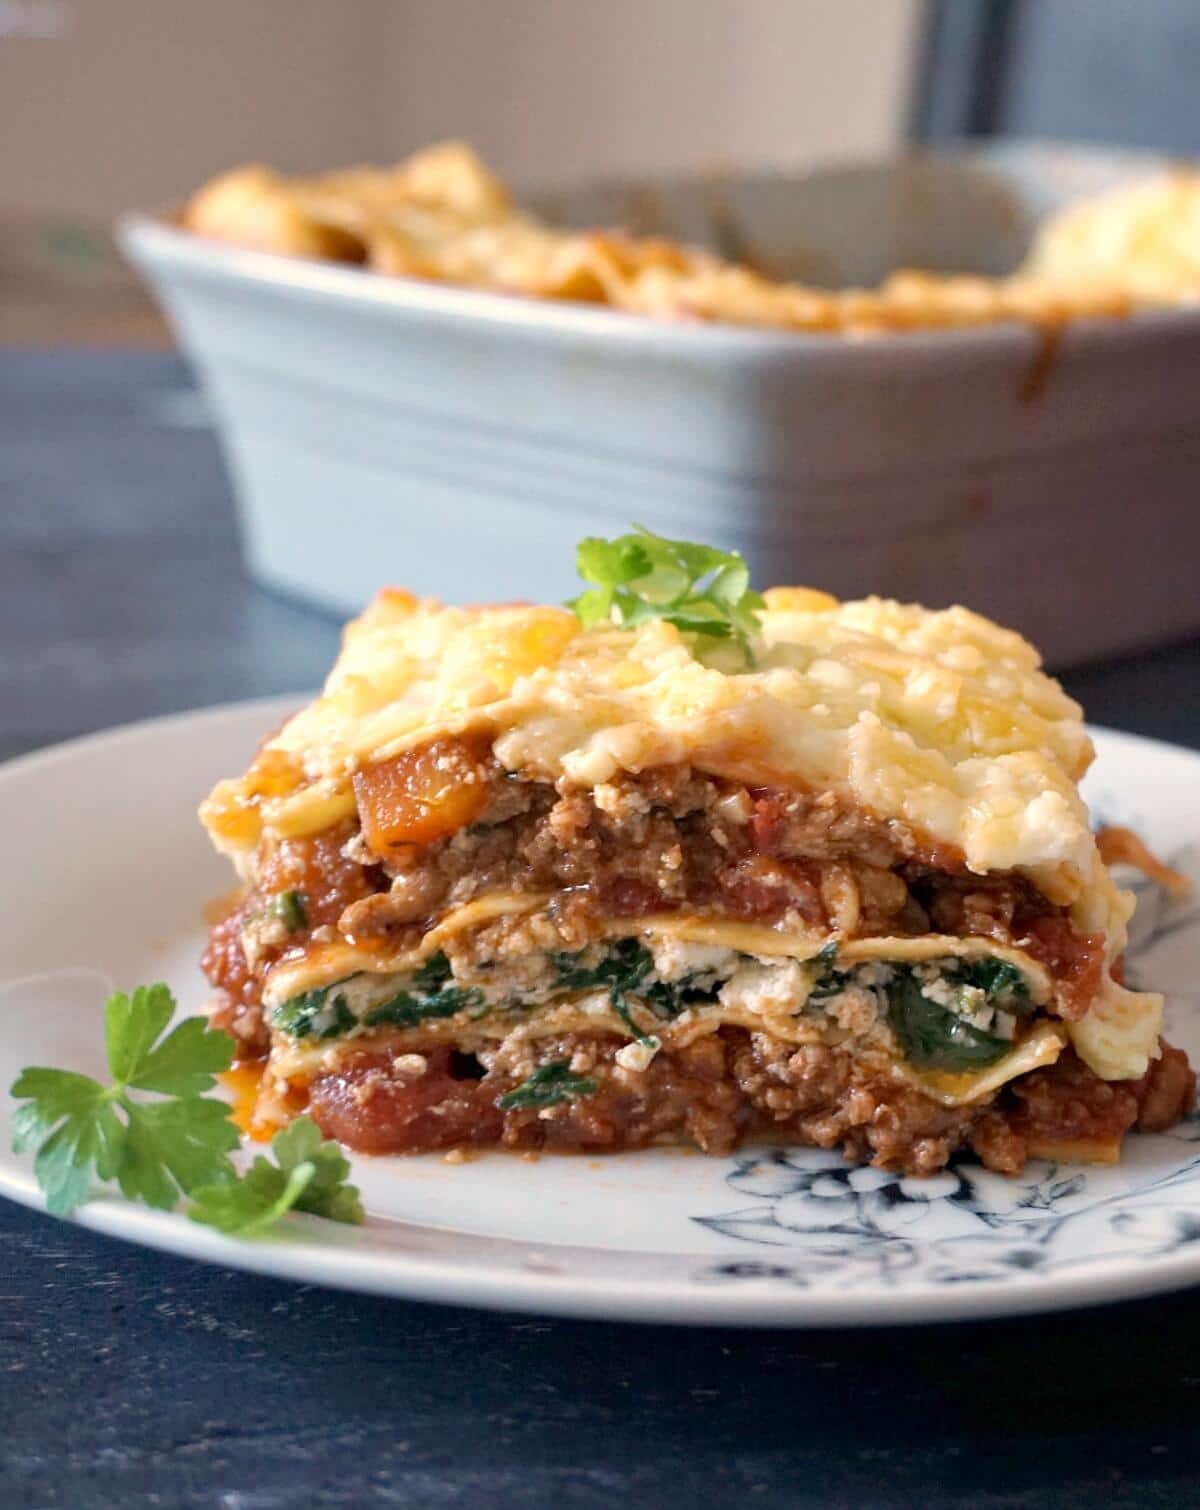 A slice of lasagna on a white plate garnished with fresh parsley leaves.